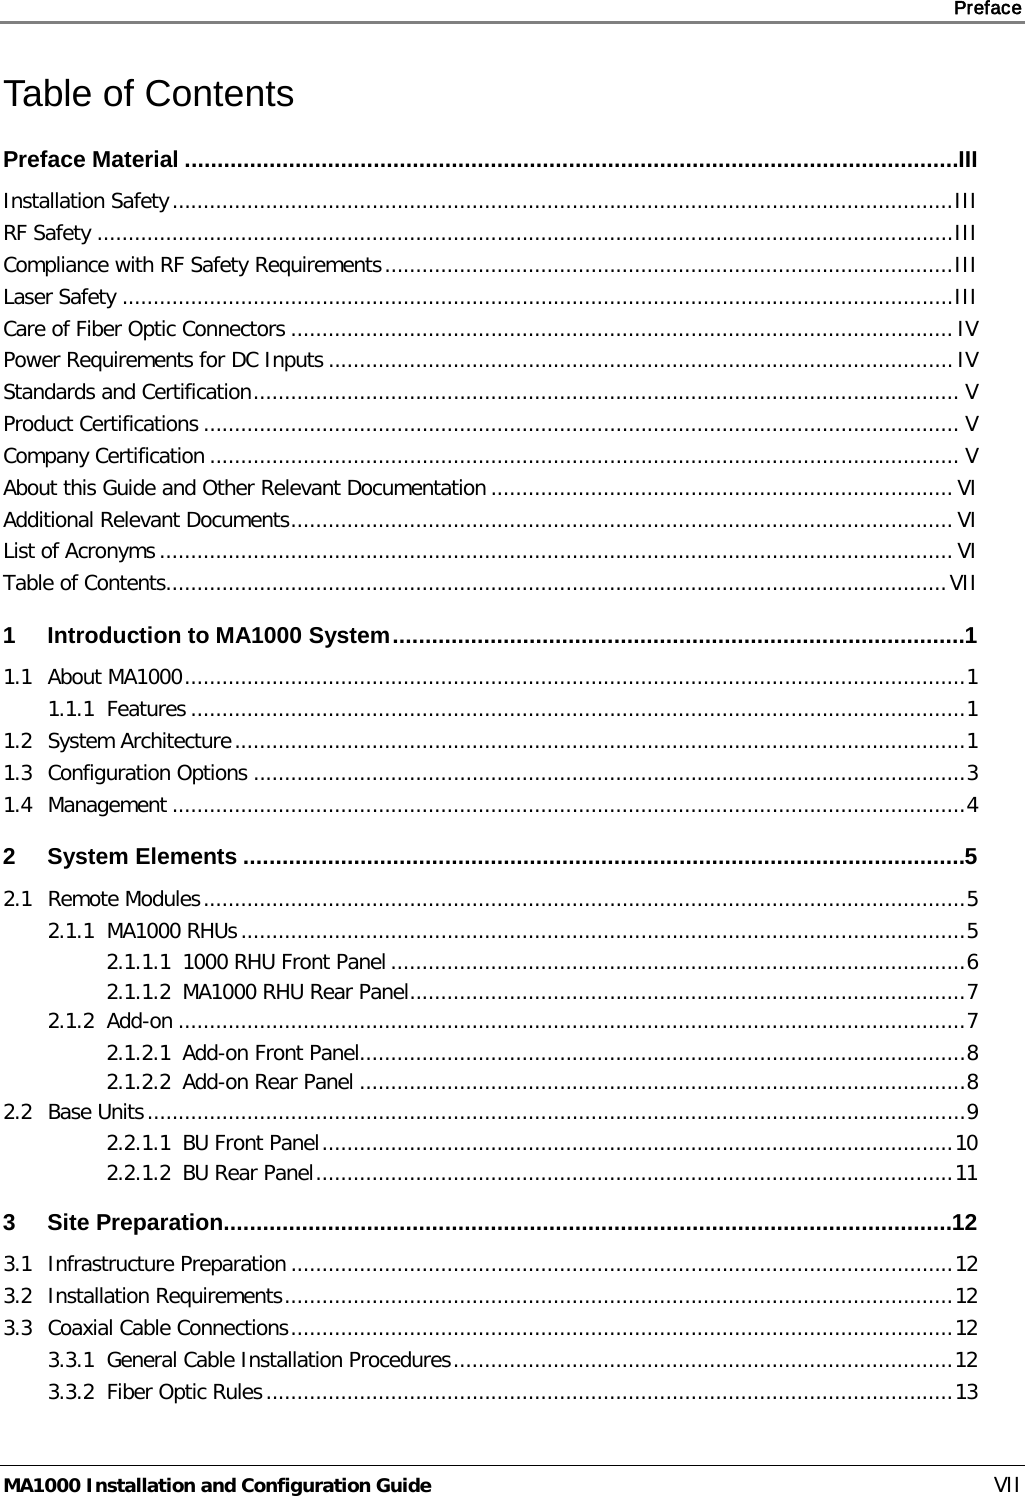     Preface       MA1000 Installation and Configuration Guide    VII Table of Contents Preface Material ....................................................................................................................... III Installation Safety ............................................................................................................................. III RF Safety ......................................................................................................................................... III Compliance with RF Safety Requirements ........................................................................................... III Laser Safety ..................................................................................................................................... III Care of Fiber Optic Connectors .......................................................................................................... IV Power Requirements for DC Inputs .................................................................................................... IV Standards and Certification ................................................................................................................. V Product Certifications ......................................................................................................................... V Company Certification ........................................................................................................................ V About this Guide and Other Relevant Documentation .......................................................................... VI Additional Relevant Documents .......................................................................................................... VI List of Acronyms ............................................................................................................................... VI Table of Contents............................................................................................................................. VII 1 Introduction to MA1000 System ........................................................................................ 1 1.1 About MA1000 ............................................................................................................................. 1 1.1.1 Features ............................................................................................................................ 1 1.2 System Architecture ..................................................................................................................... 1 1.3 Configuration Options .................................................................................................................. 3 1.4 Management ............................................................................................................................... 4 2 System Elements ............................................................................................................... 5 2.1 Remote Modules .......................................................................................................................... 5 2.1.1 MA1000 RHUs .................................................................................................................... 5 2.1.1.1 1000 RHU Front Panel ............................................................................................ 6 2.1.1.2 MA1000 RHU Rear Panel ......................................................................................... 7 2.1.2 Add-on .............................................................................................................................. 7 2.1.2.1 Add-on Front Panel................................................................................................. 8 2.1.2.2 Add-on Rear Panel ................................................................................................. 8 2.2 Base Units ................................................................................................................................... 9 2.2.1.1 BU Front Panel ..................................................................................................... 10 2.2.1.2 BU Rear Panel ...................................................................................................... 11 3 Site Preparation ................................................................................................................ 12 3.1 Infrastructure Preparation .......................................................................................................... 12 3.2 Installation Requirements ........................................................................................................... 12 3.3 Coaxial Cable Connections .......................................................................................................... 12 3.3.1 General Cable Installation Procedures ................................................................................ 12 3.3.2 Fiber Optic Rules .............................................................................................................. 13 